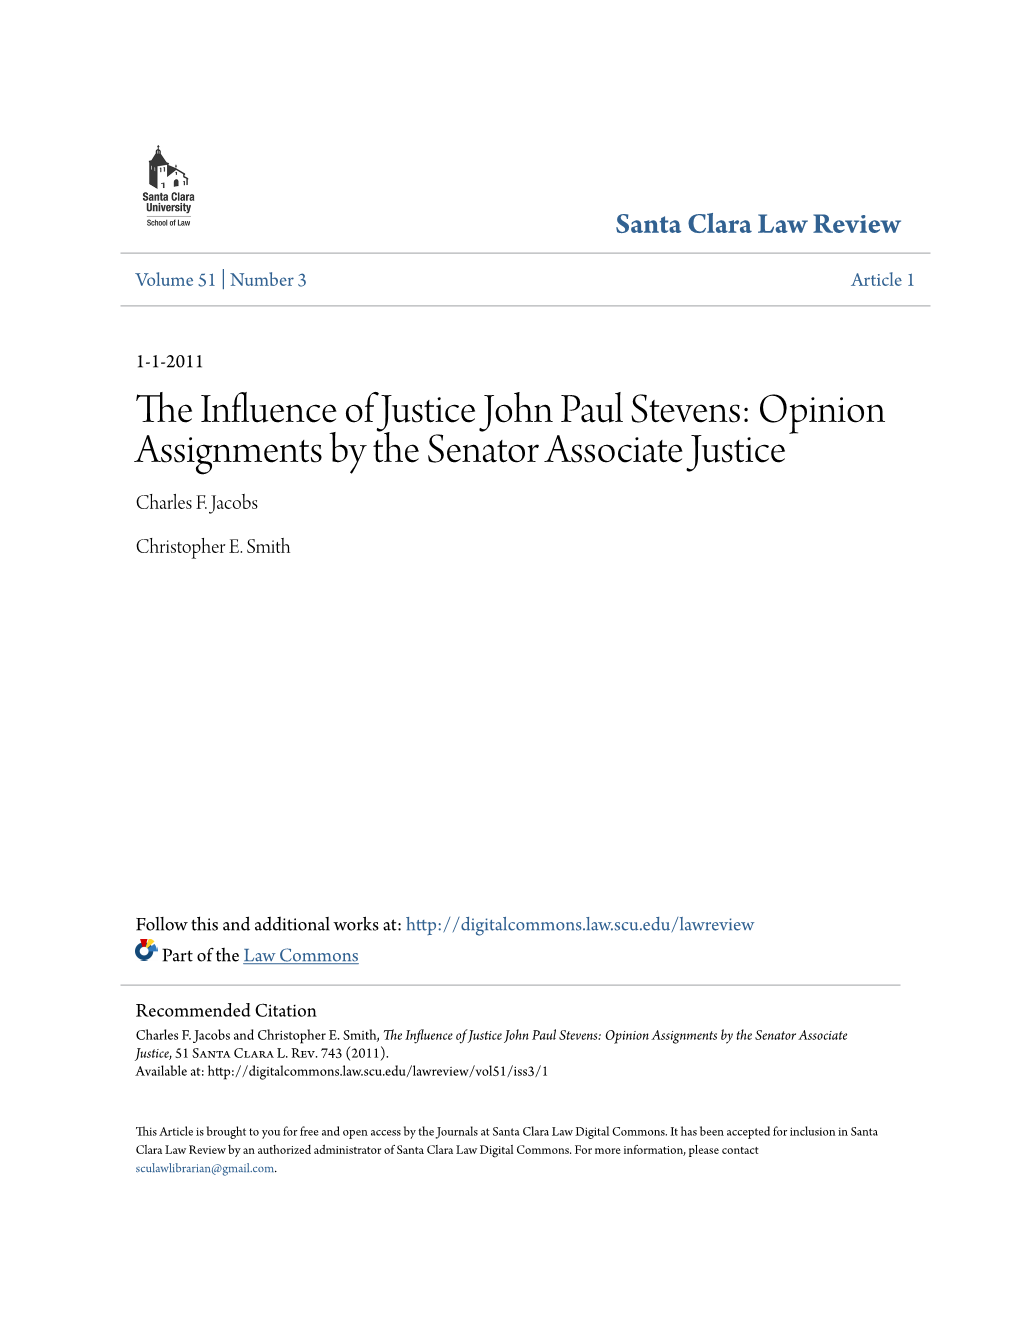 The Influence of Justice John Paul Stevens: Opinion Assignments by the Senator Associate Justice, 51 Santa Clara L